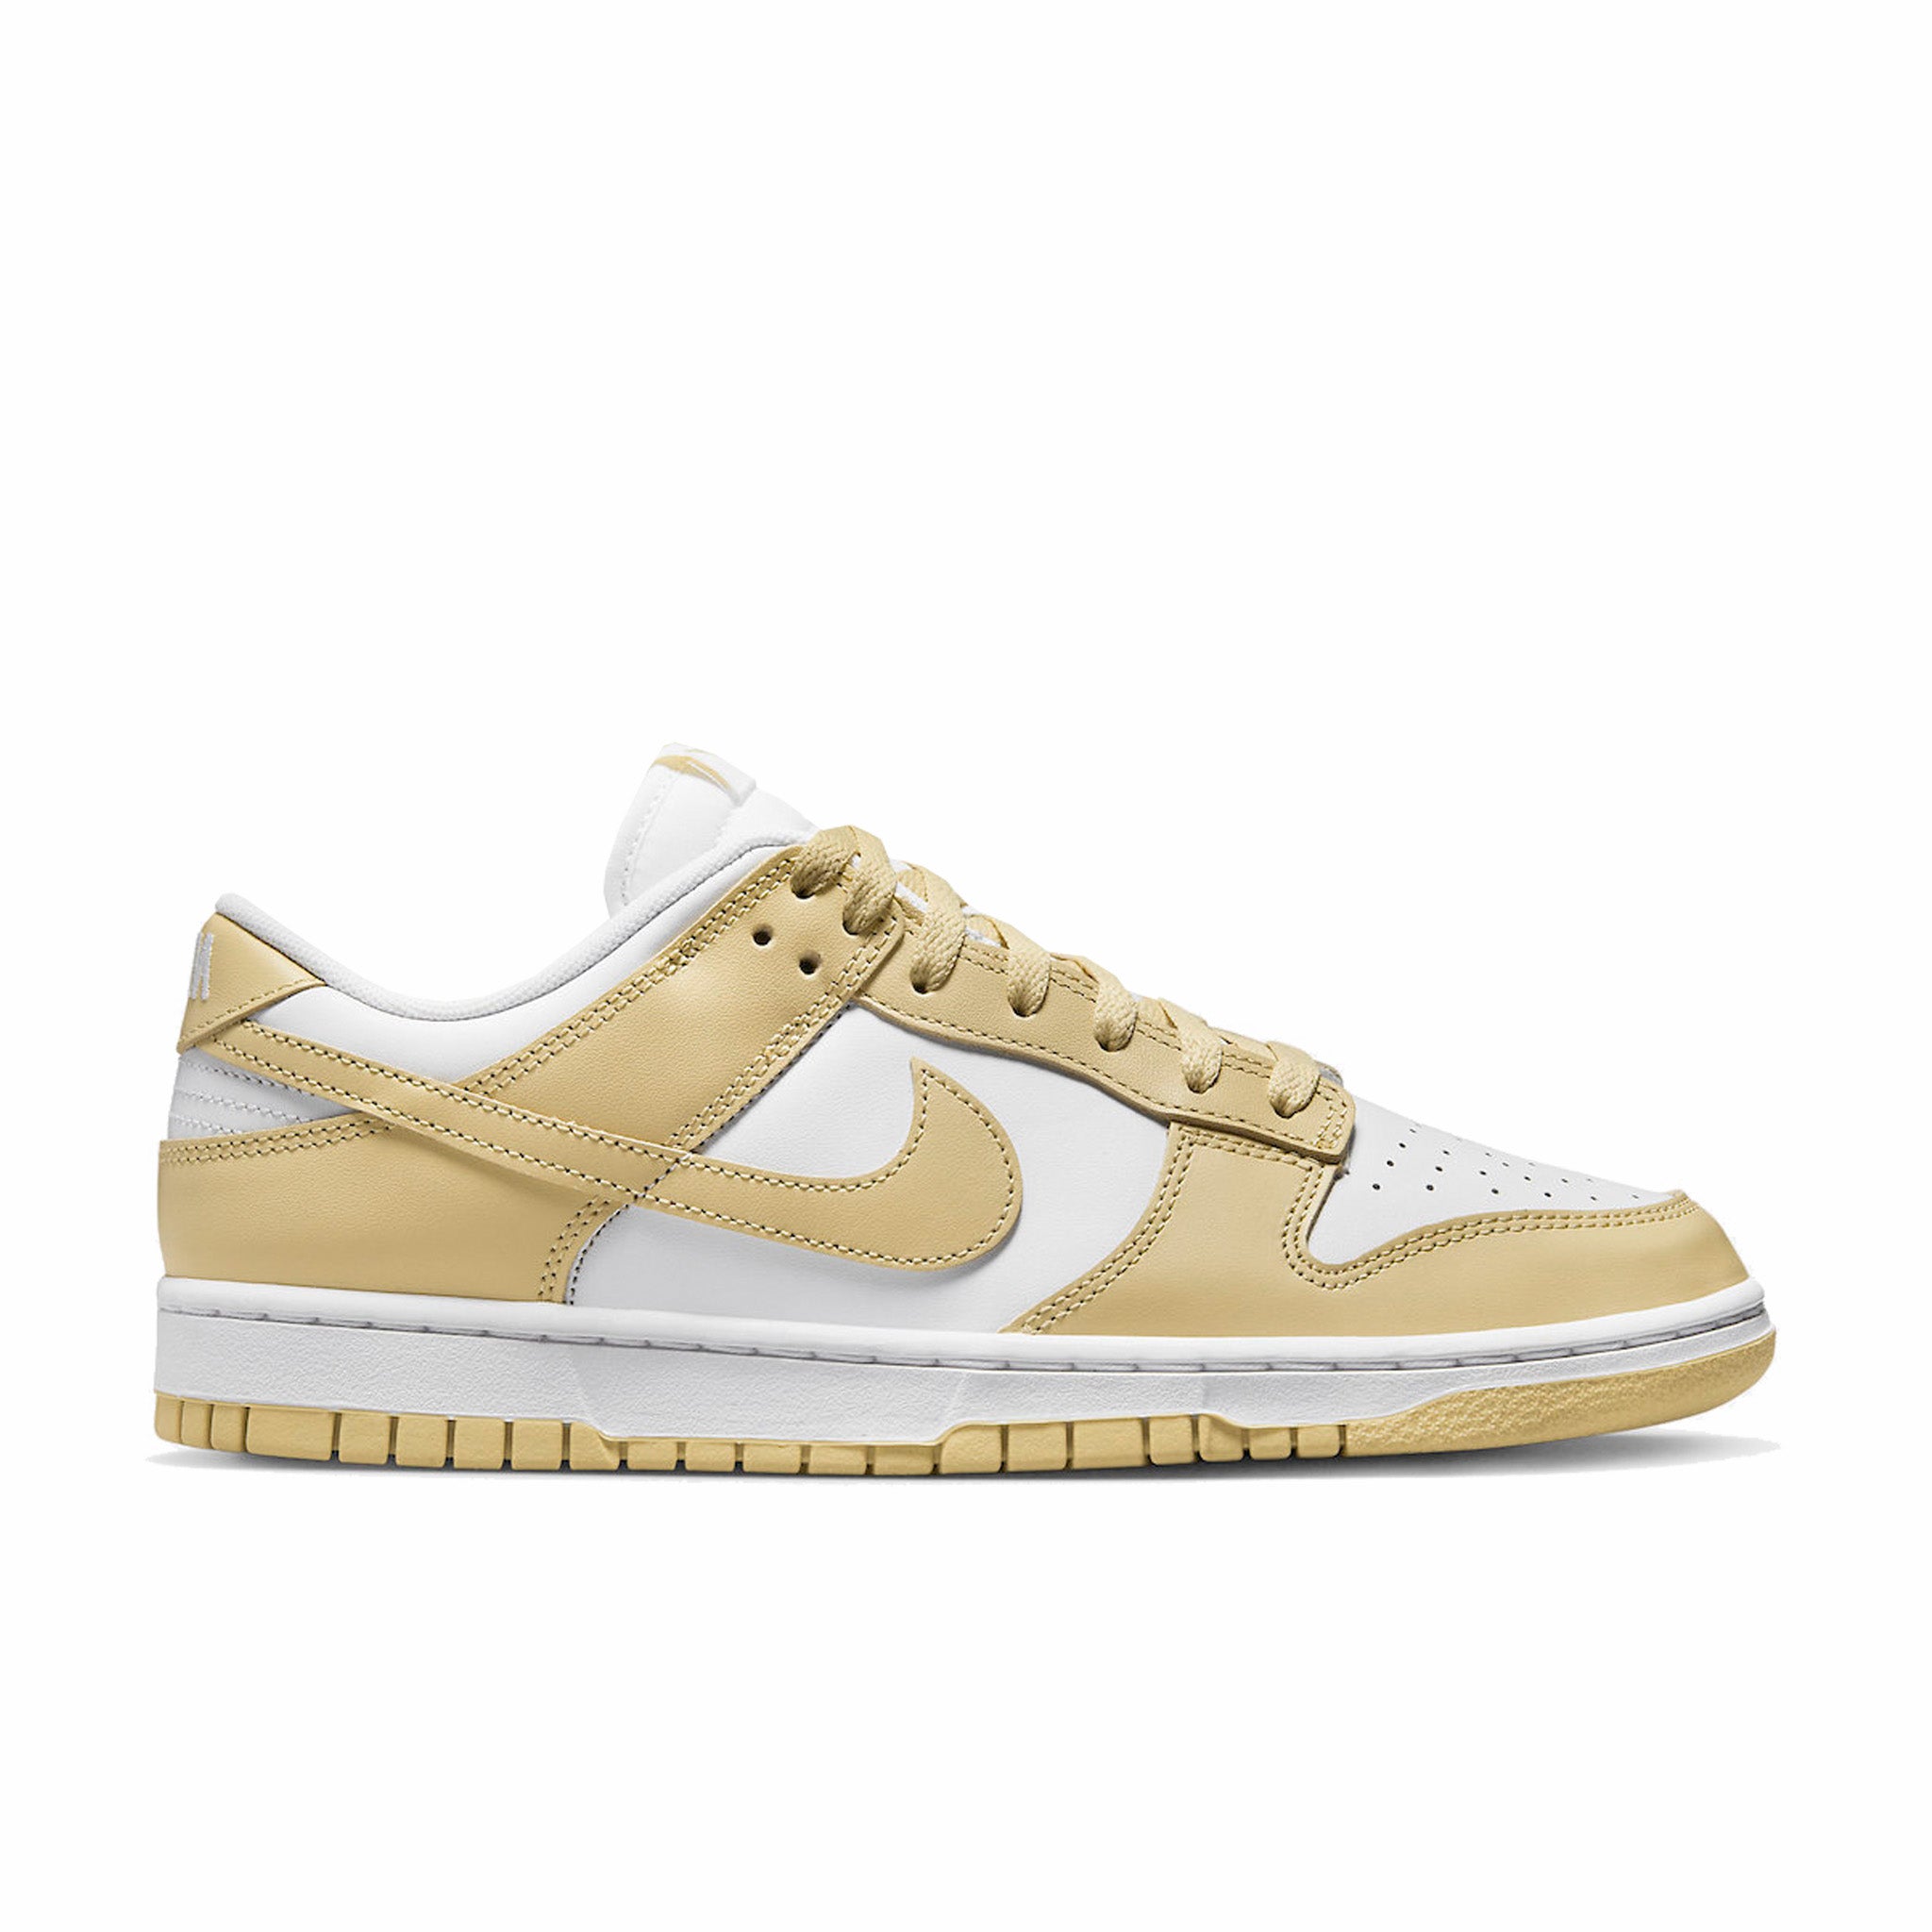 Nike Dunk Low “Team Gold” (White/Team Gold-Wolf Grey-White) - August Shop